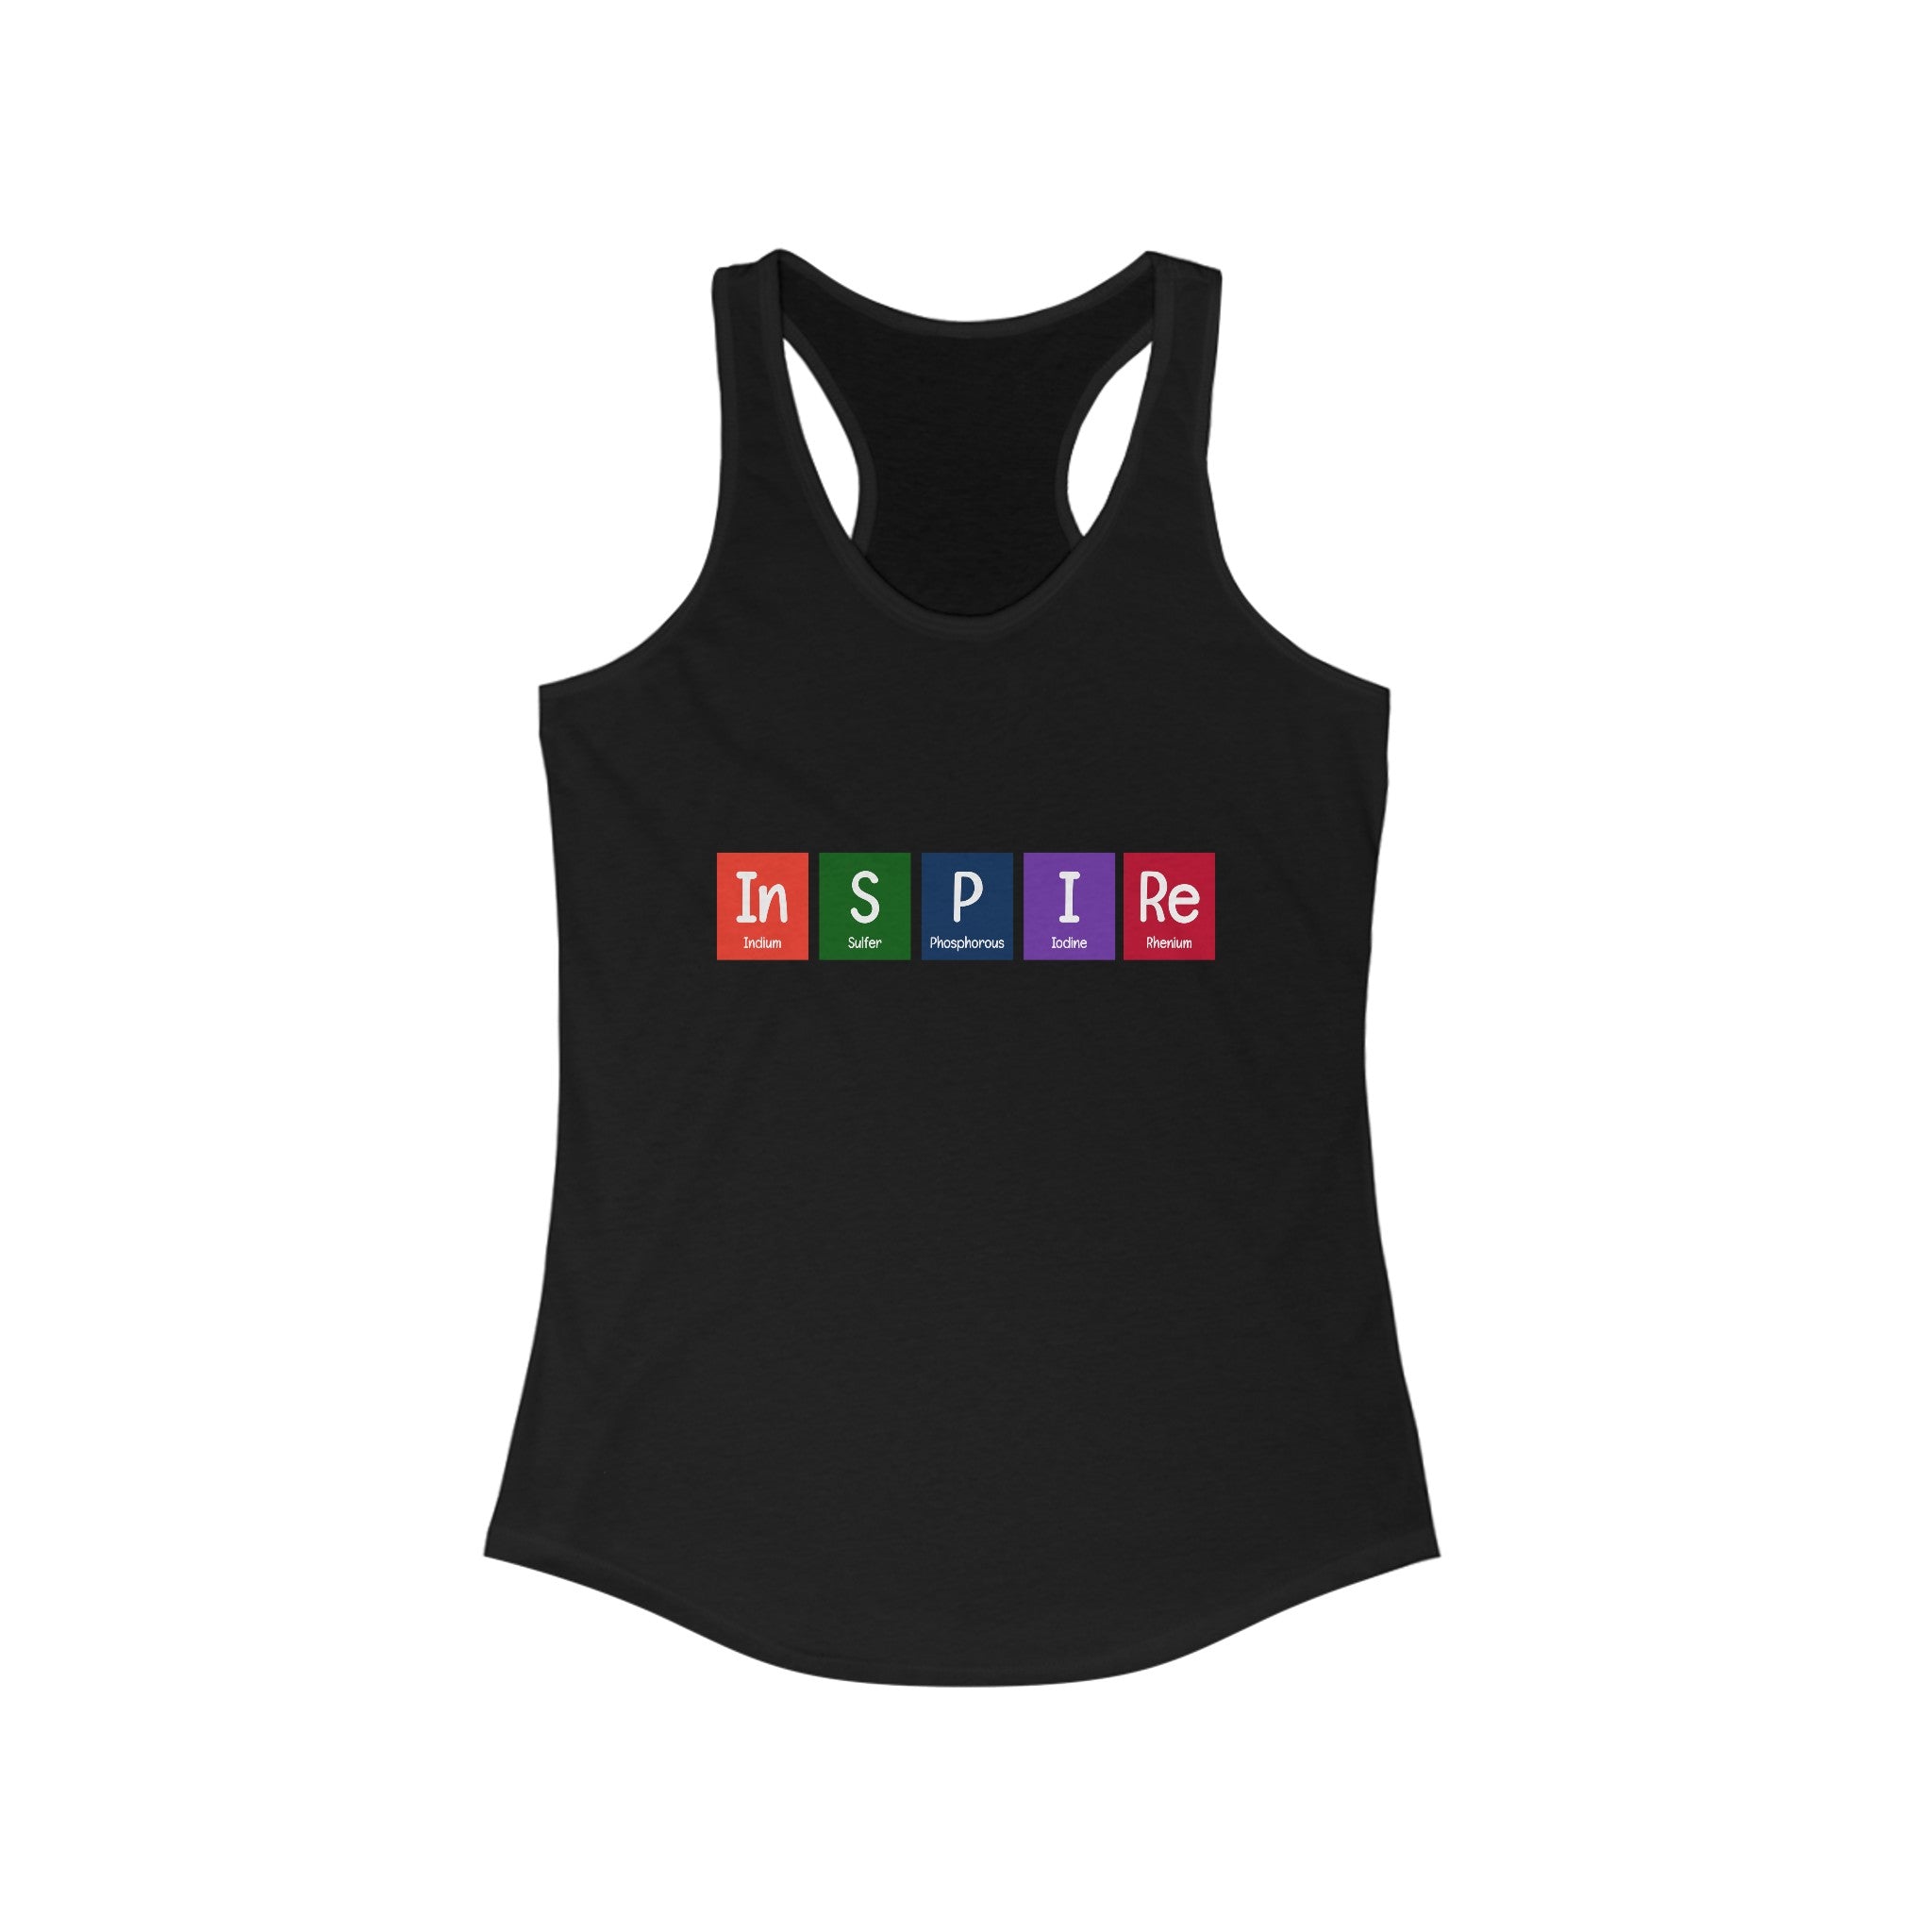 Ultra-light black In-S-P-I-Re - Women's Racerback Tank with the word "INSPIRE" creatively written using elements from the periodic table on the front, perfect for active living.